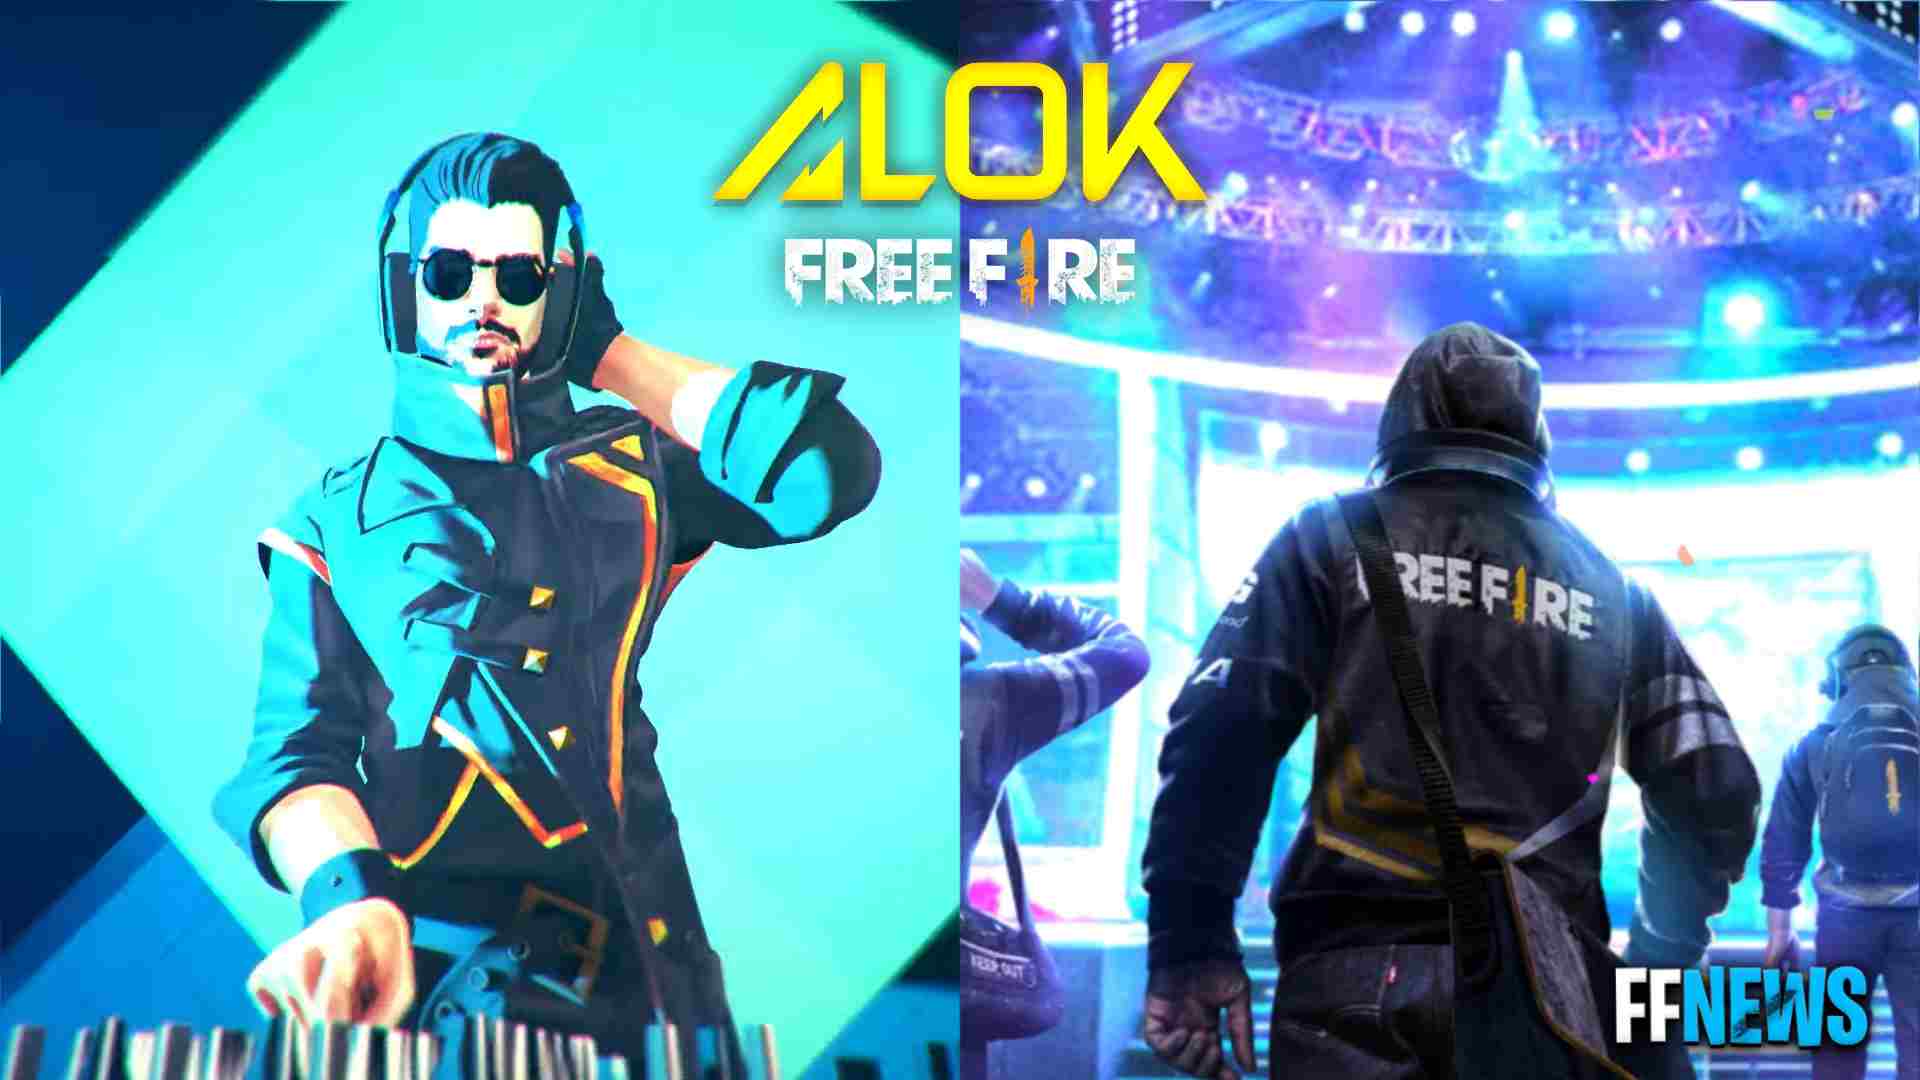 Free Fire Character Dj Alok Wallpapers Wallpaper Cave Free fire alok character png image with transparent background for free & unlimited download, in hd quality! free fire character dj alok wallpapers